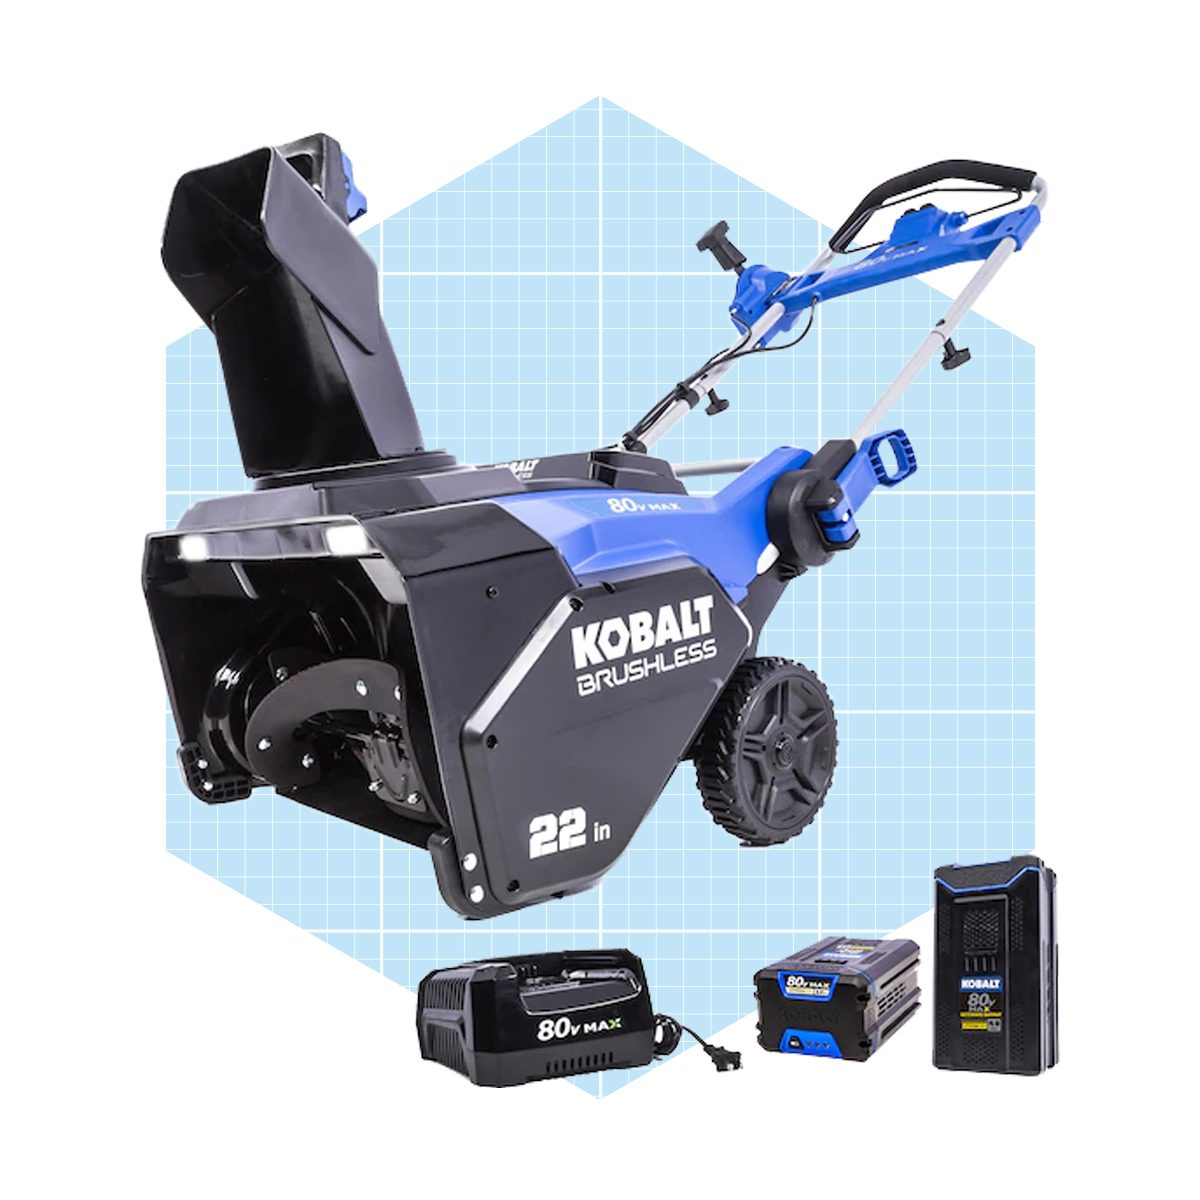 Kobalt Brushless 80 Volt Max 22 In Single Stage Brushless Cordless Electric Snow Blower Ecomm Lowes.com